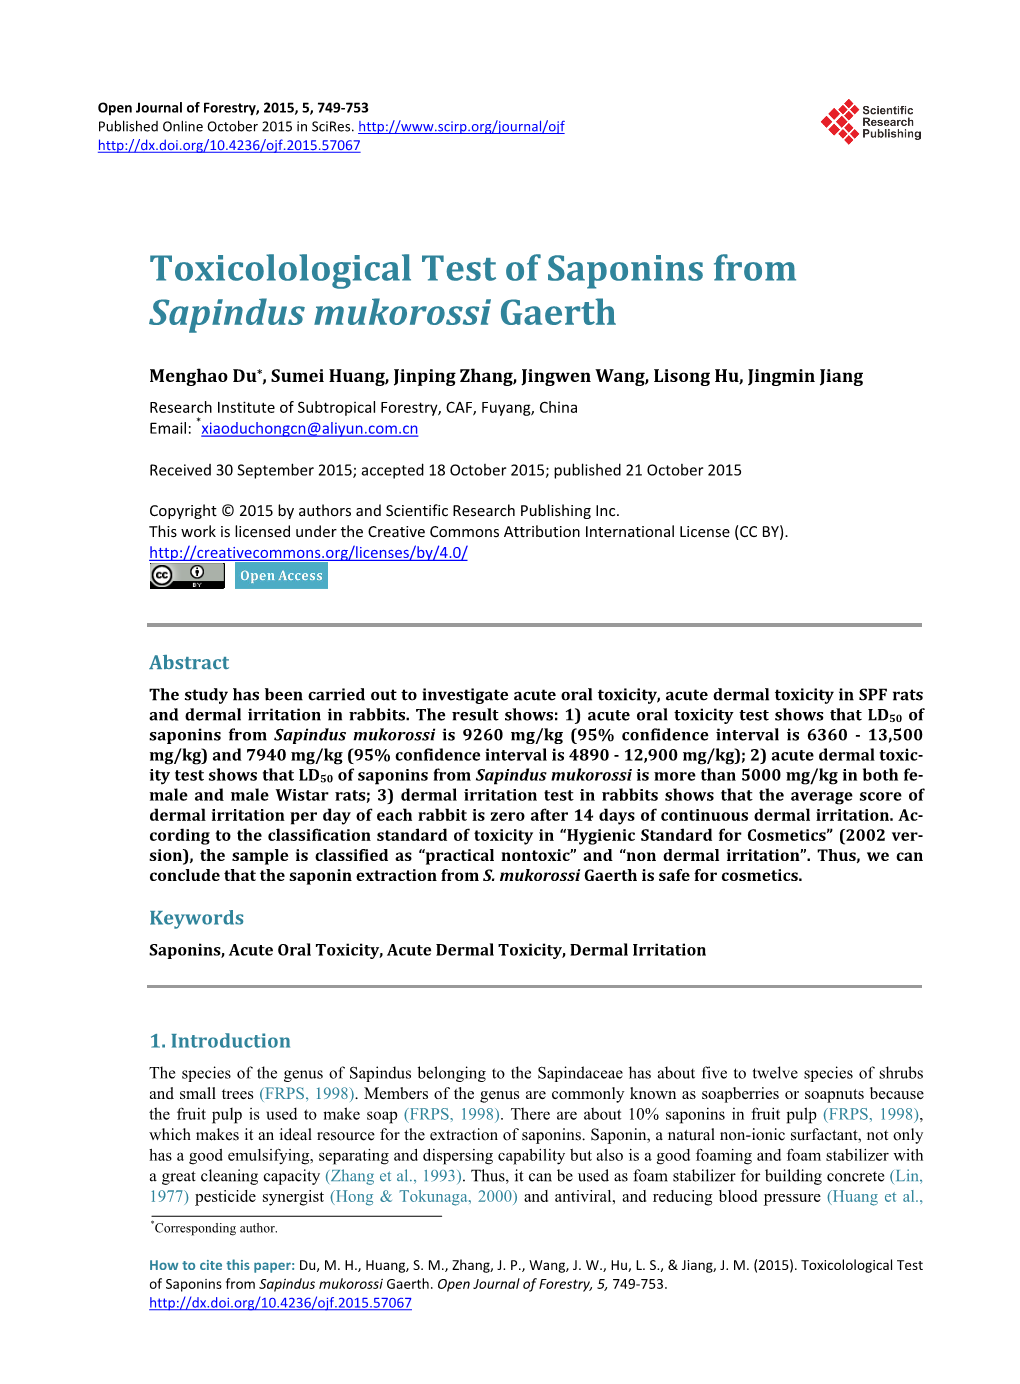 Toxicolological Test of Saponins from Sapindus Mukorossi Gaerth